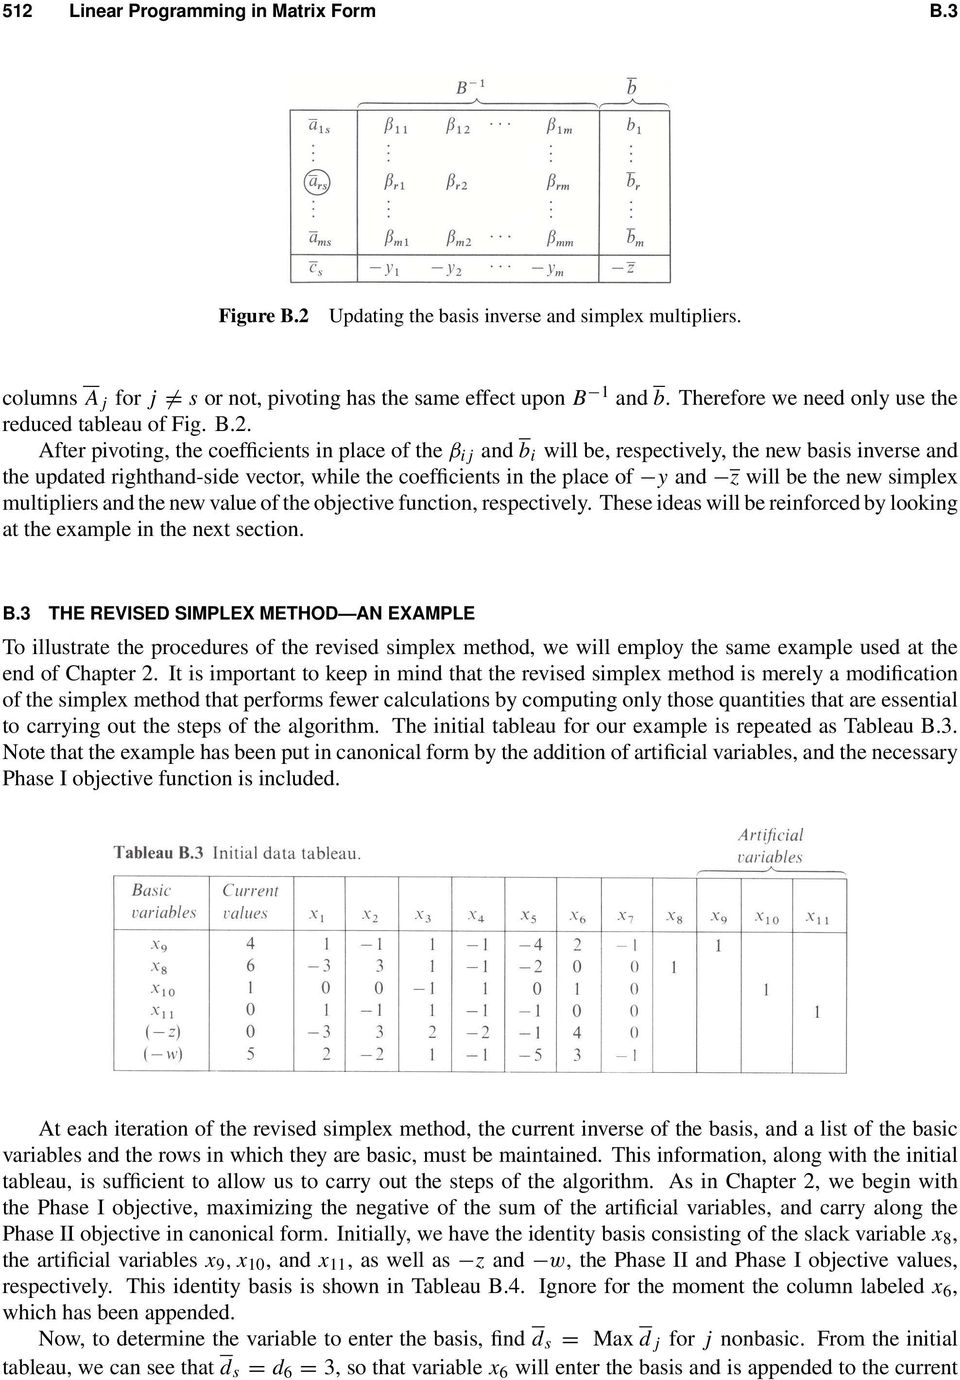 . After pivoting, the coefficients in place of the β i j and b i will be, respectively, the new basis inverse and the updated righthand-side vector, while the coefficients in the place of y and z